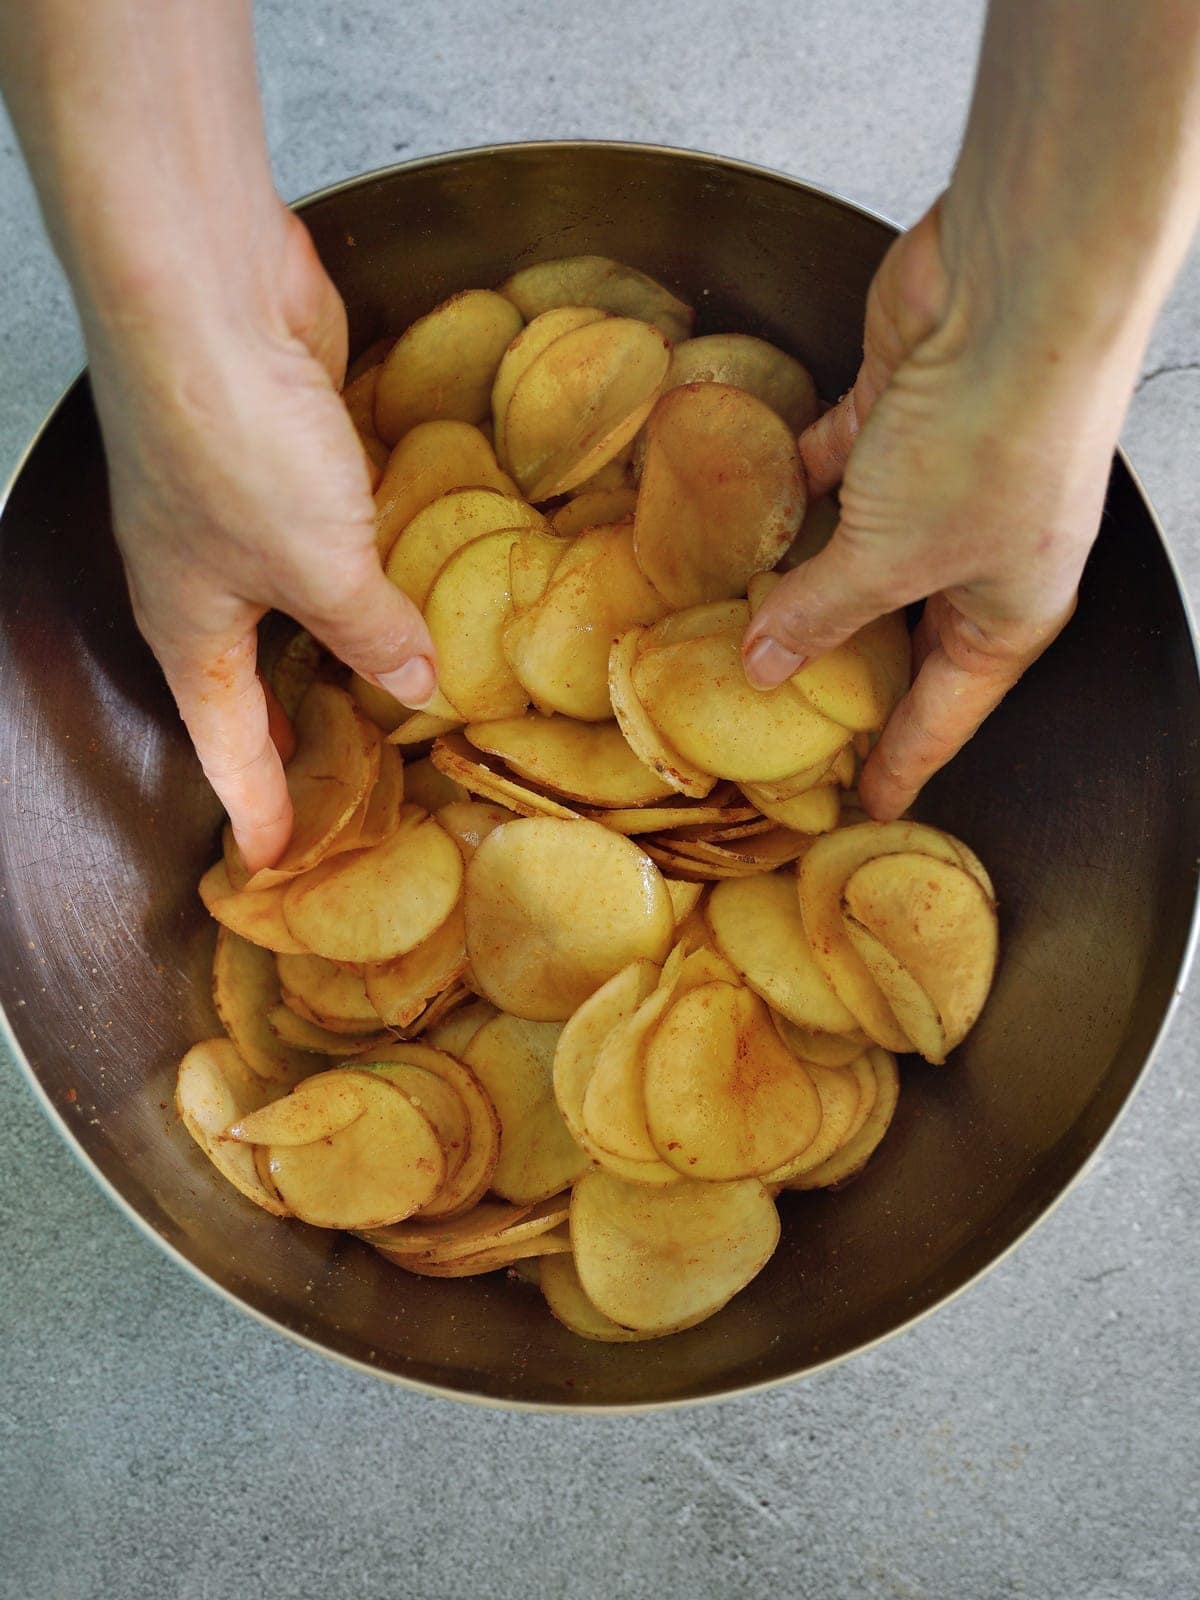 tossing potato slices in silver bowl with hands